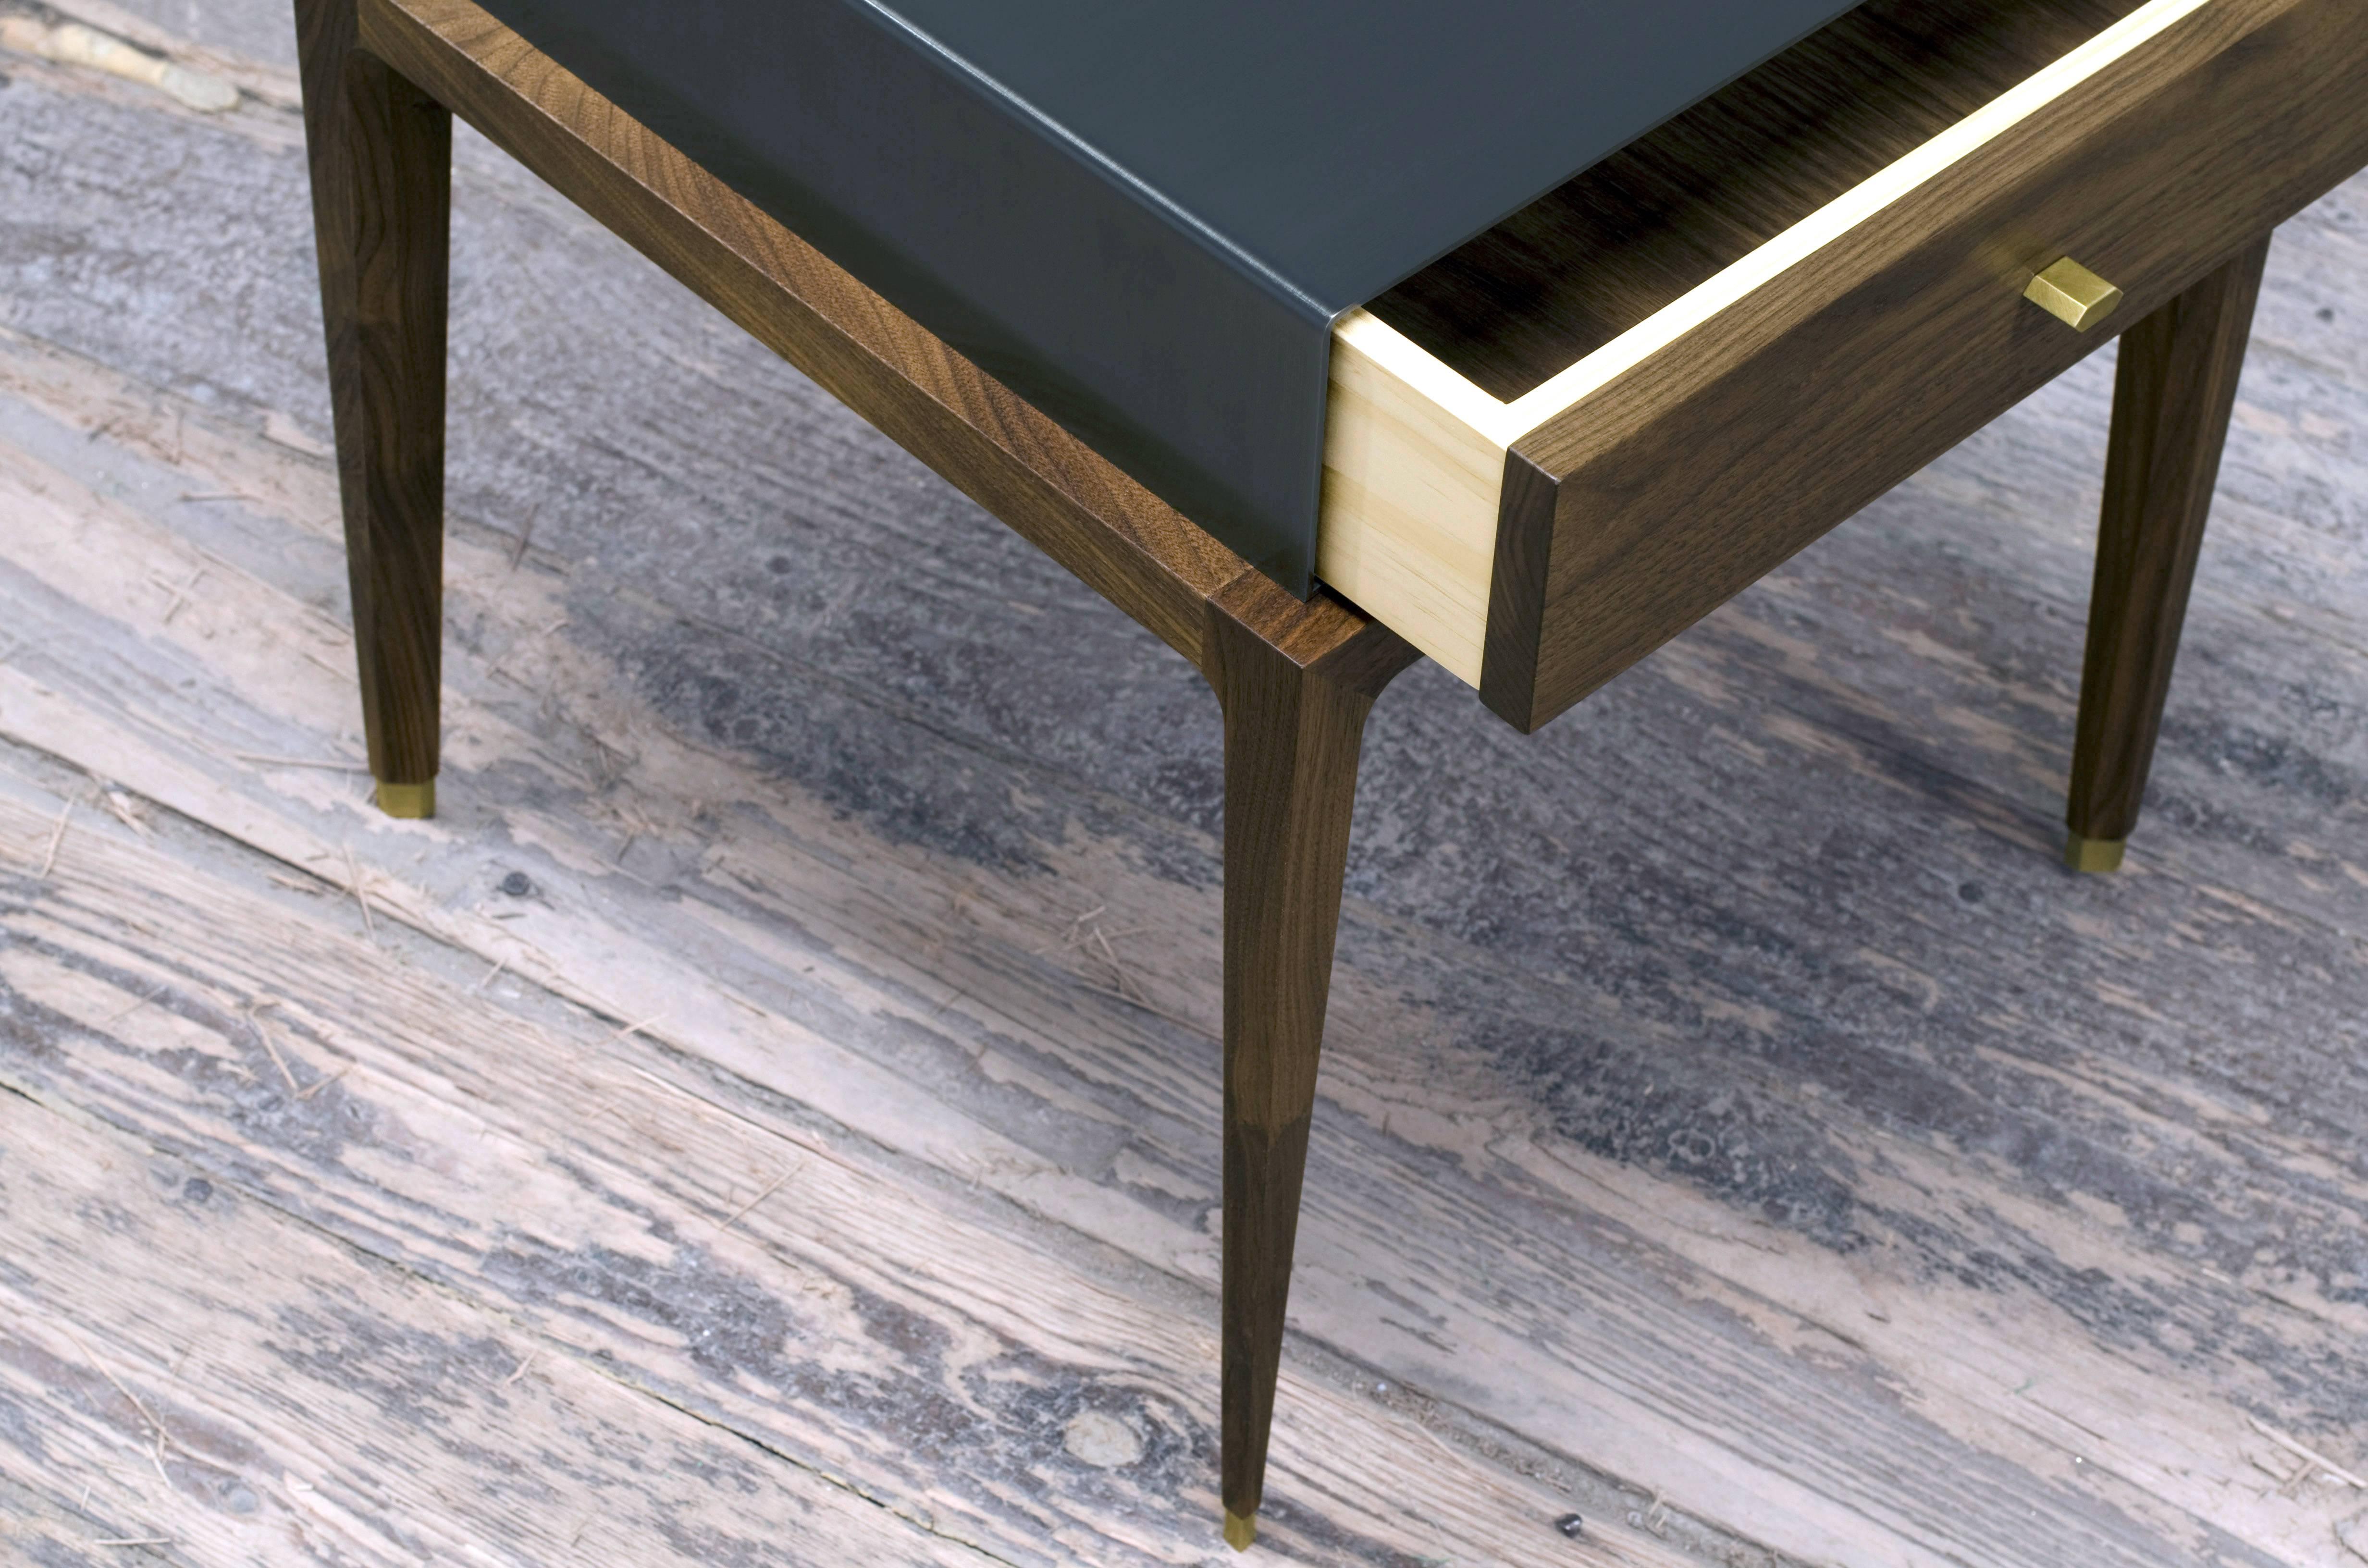 Shown in solid oiled walnut, gunmetal steel case and burnished bronze hardware, the Visalia end table features a single solid wood drawer with under-mount drawer slides, custom-made hardware and hand applied finishes.
Dimensions (as pictured): 18